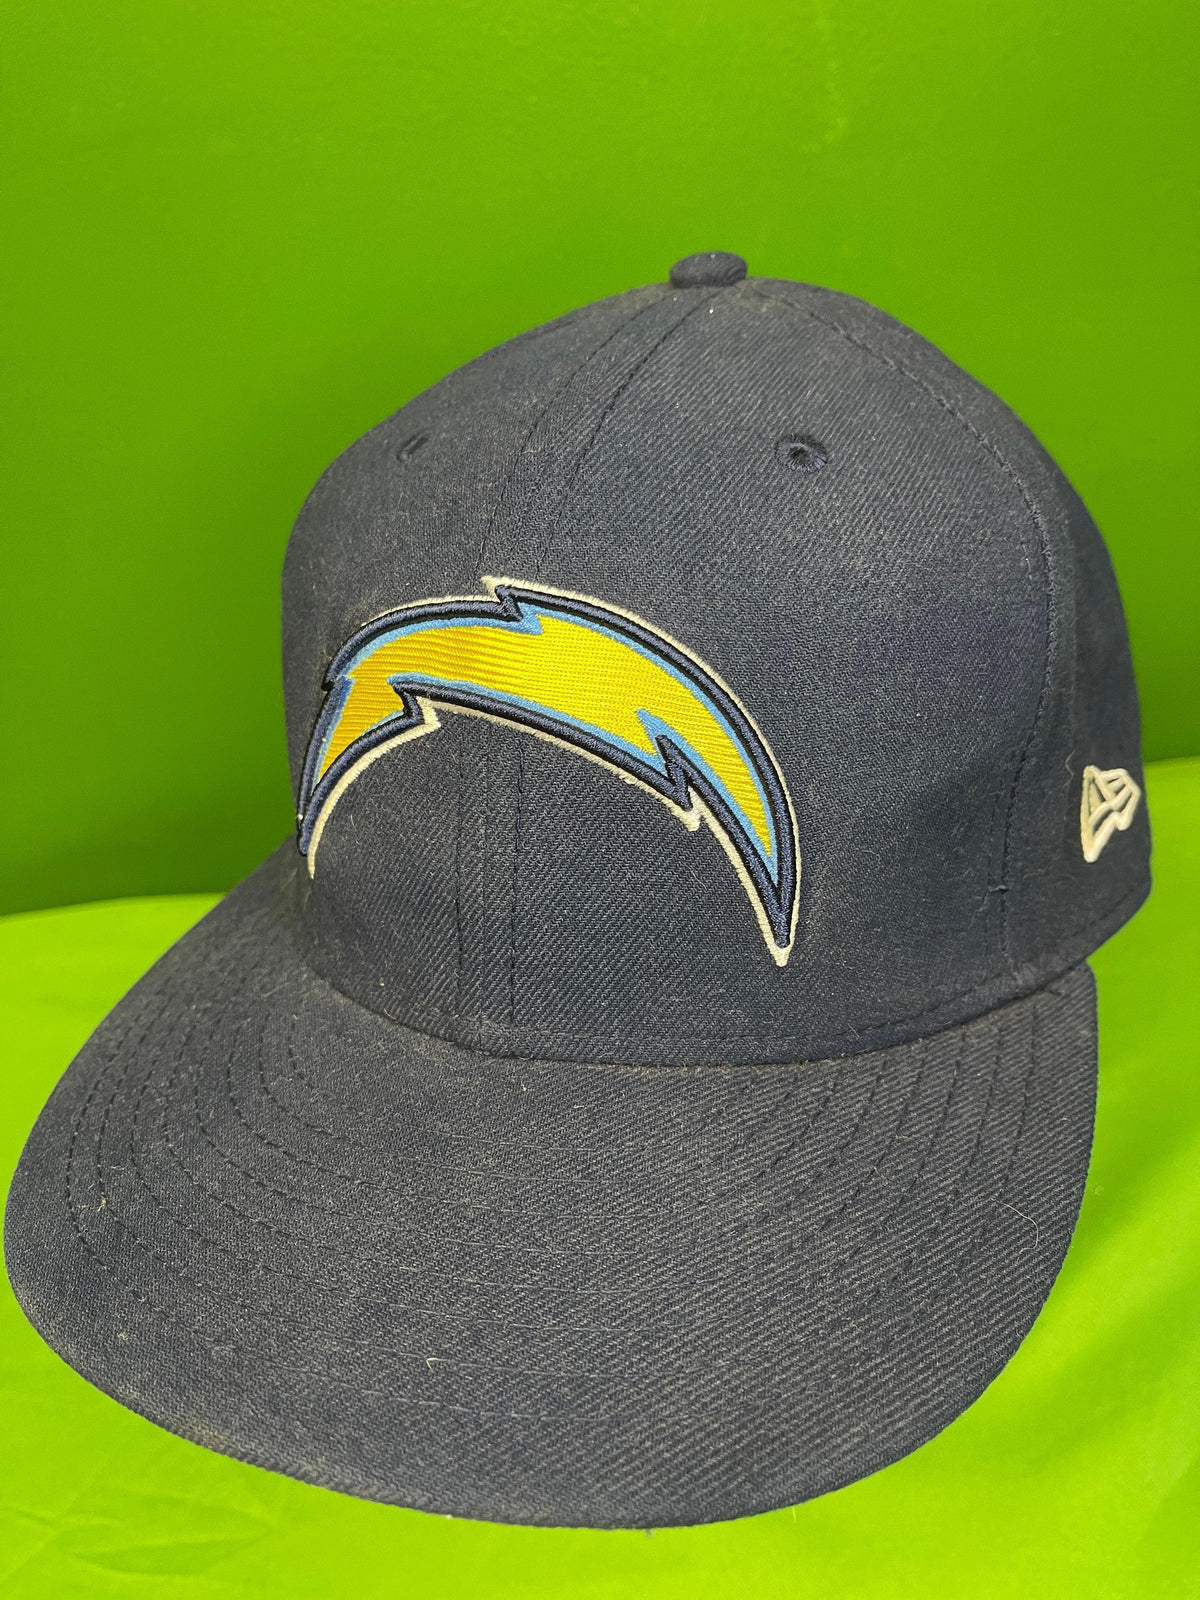 NFL Los Angeles Chargers New Era 59FIFTY Baseball Cap/Hat Size 7-1/4